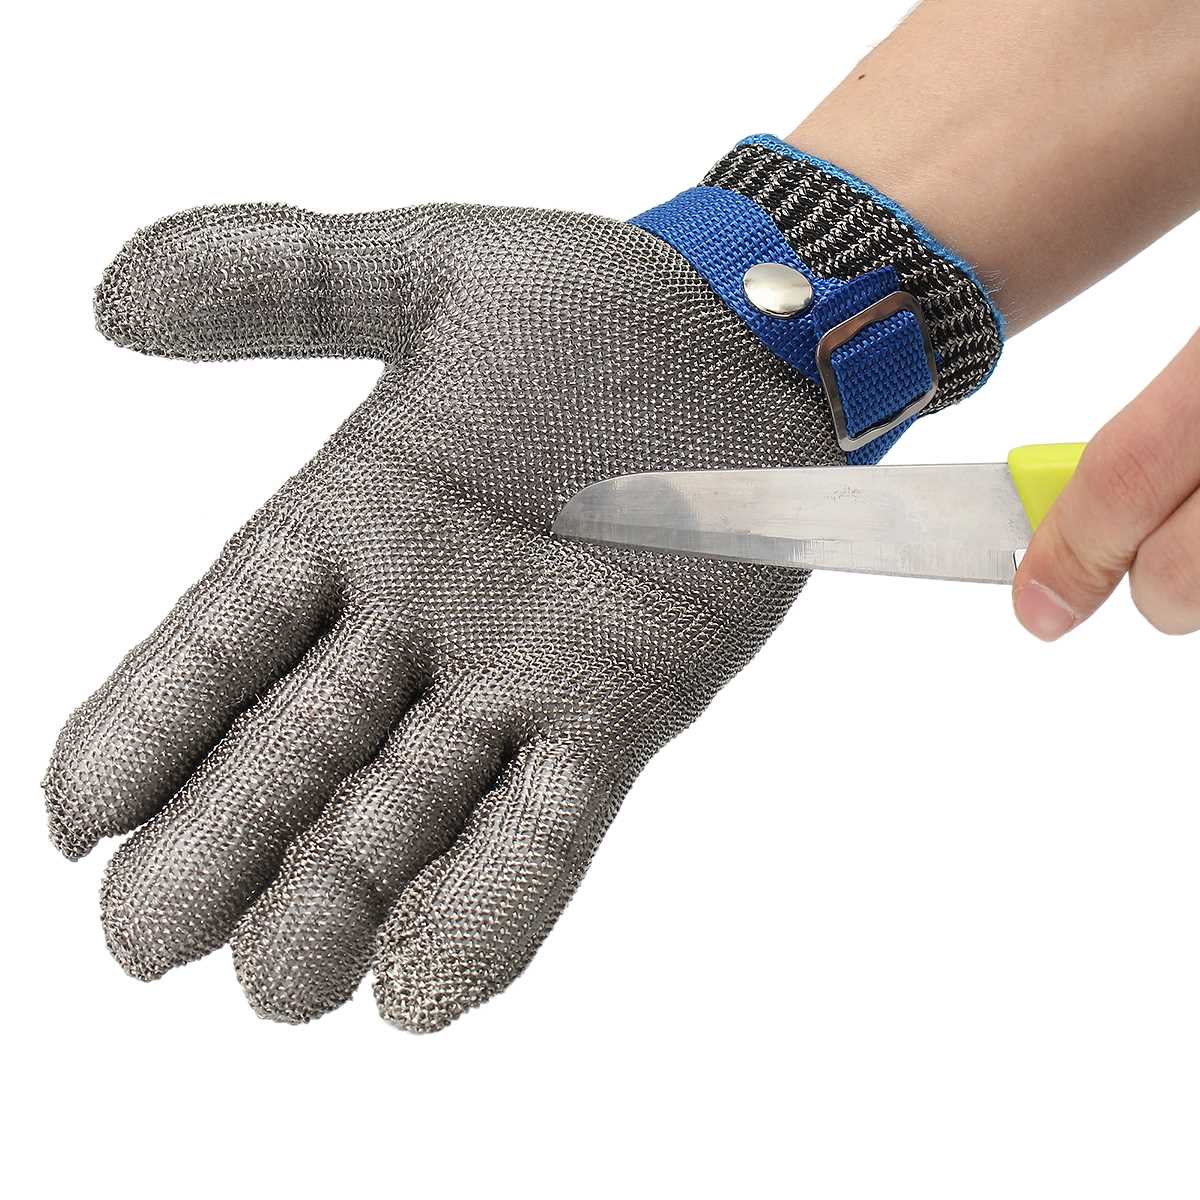 Size S Safety Cut Proof Stab Resistant Stainless Steel Wire Metal Mesh Glove High Performance Level 5 Protection